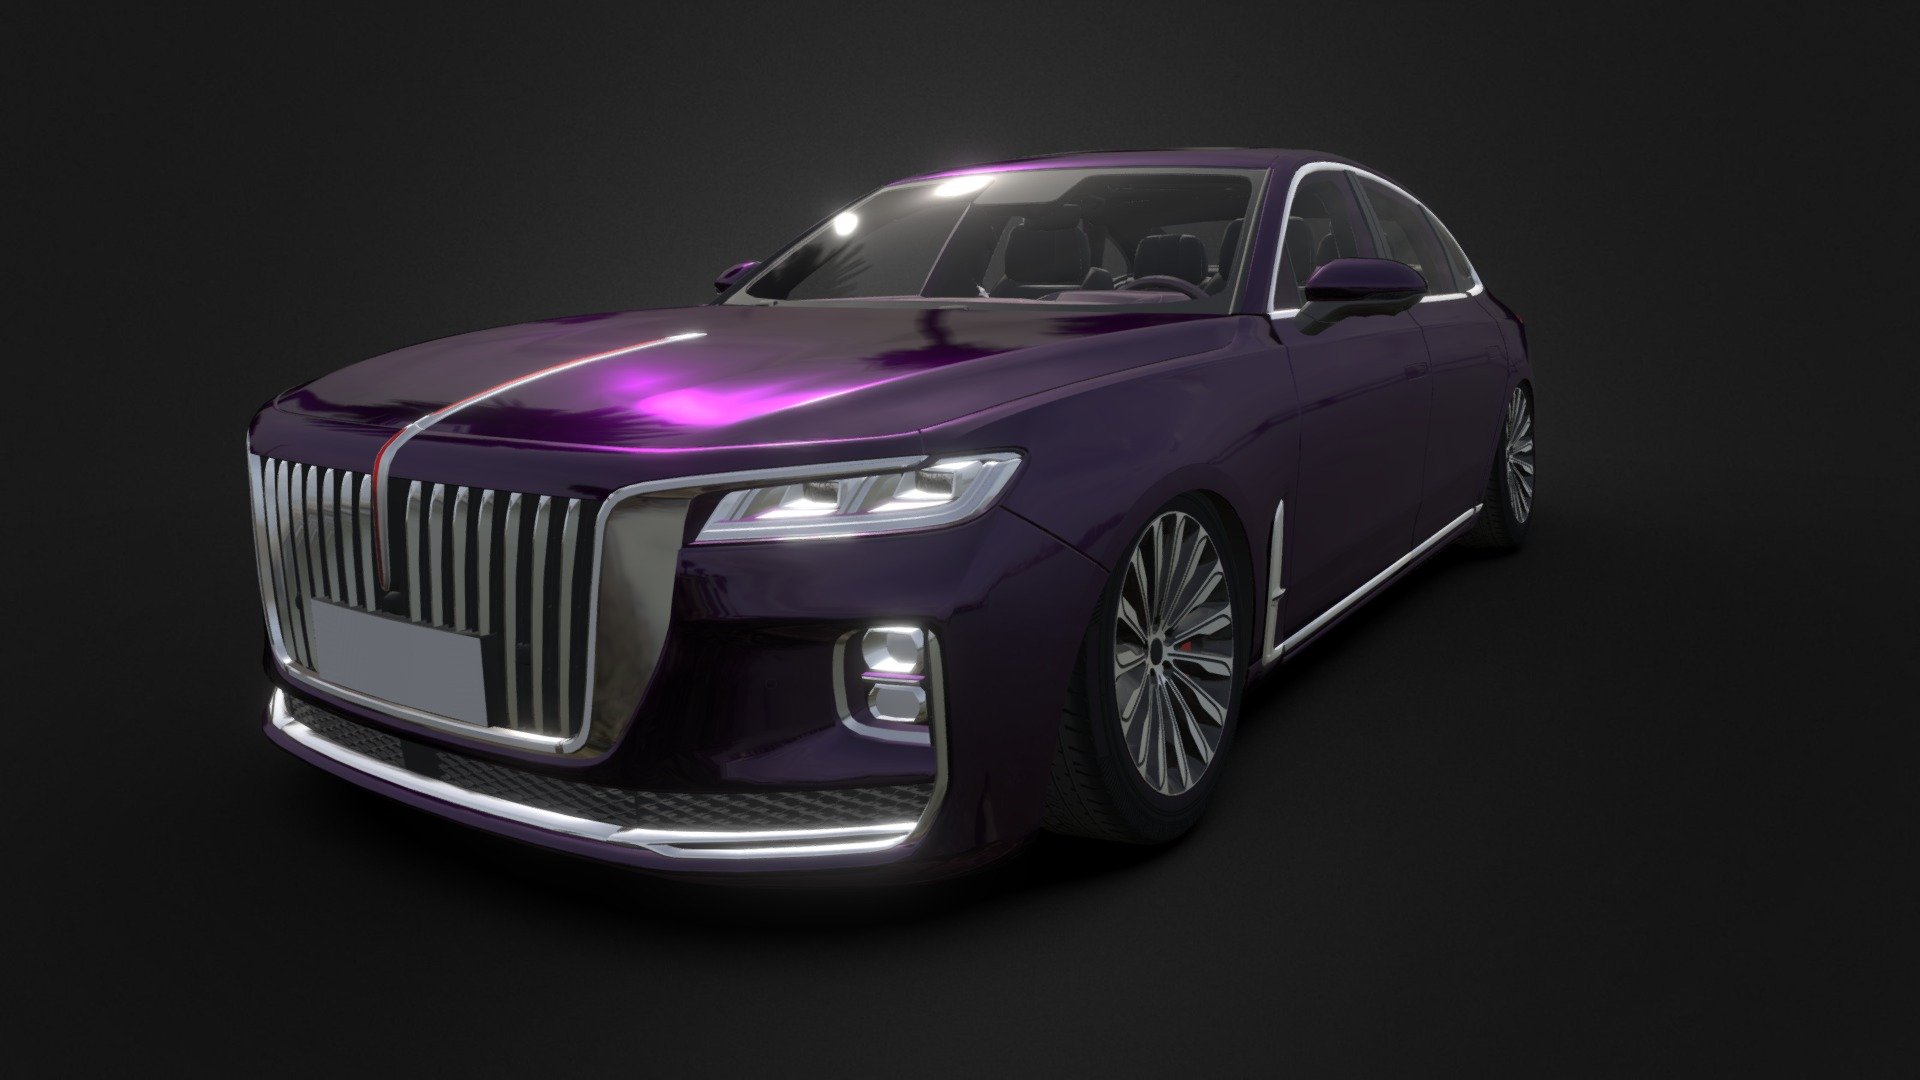 The Hongqi H9 is a full-size luxury car produced by the FAW Group under the Hongqi marque 3d model